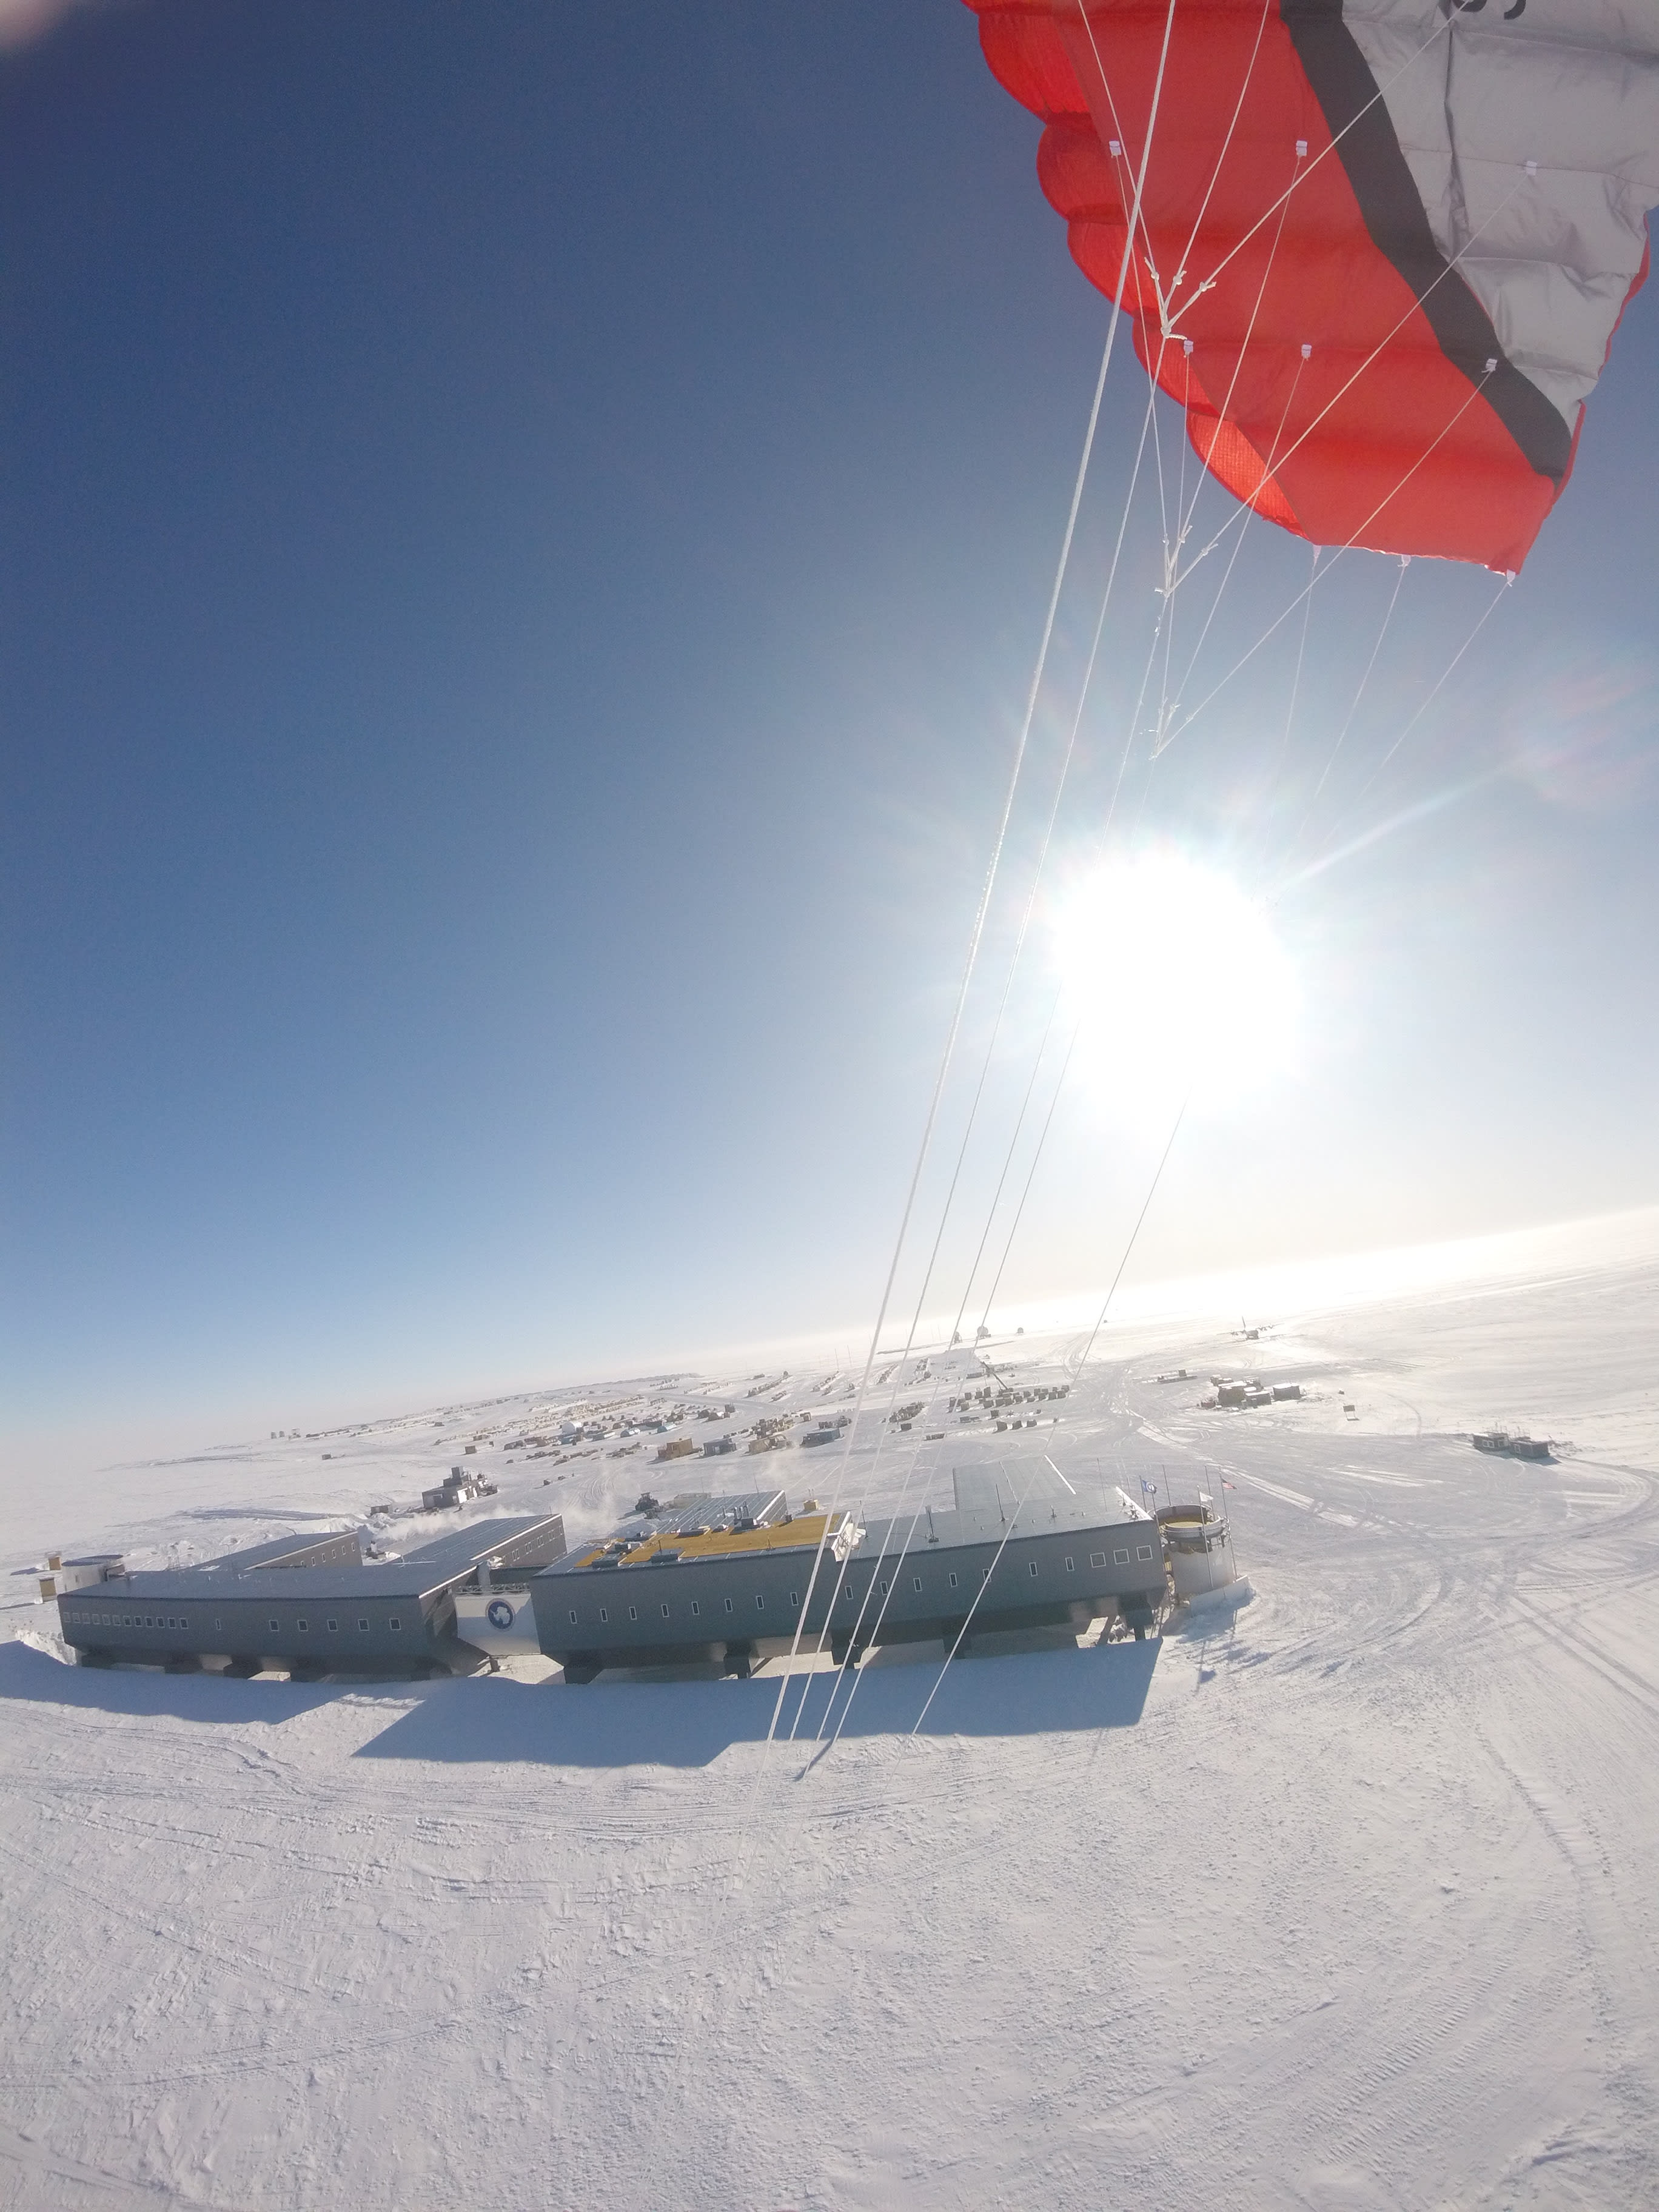 An aerial view of the South Pole station on a clear sunny day, taken from a camera attached to a kite.